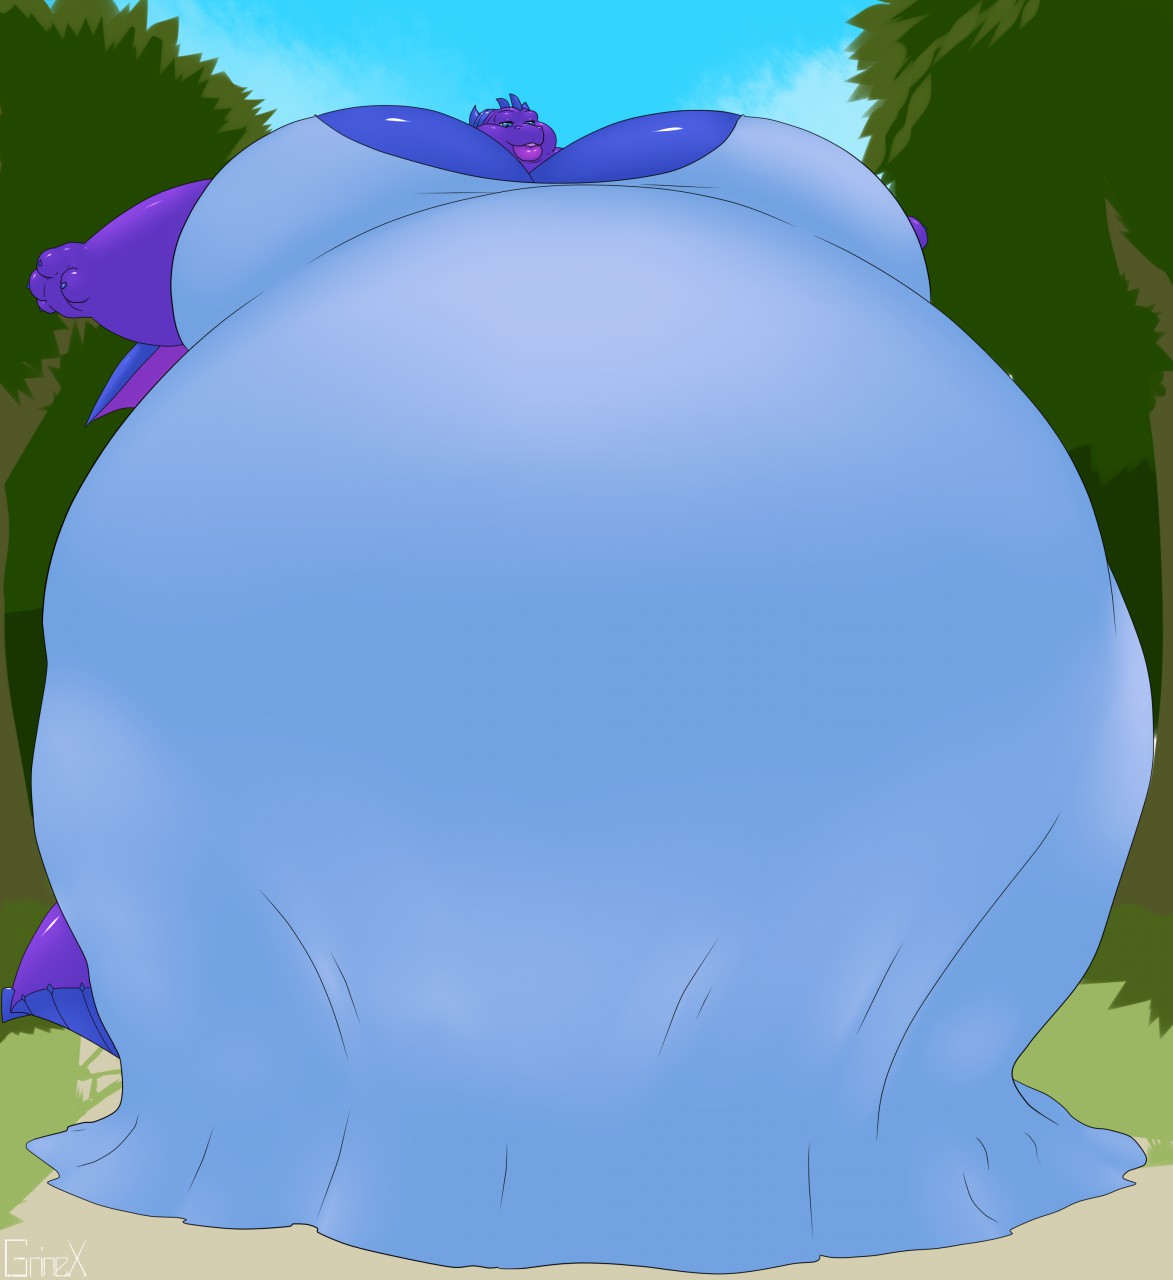 Sexy blueberry inflation